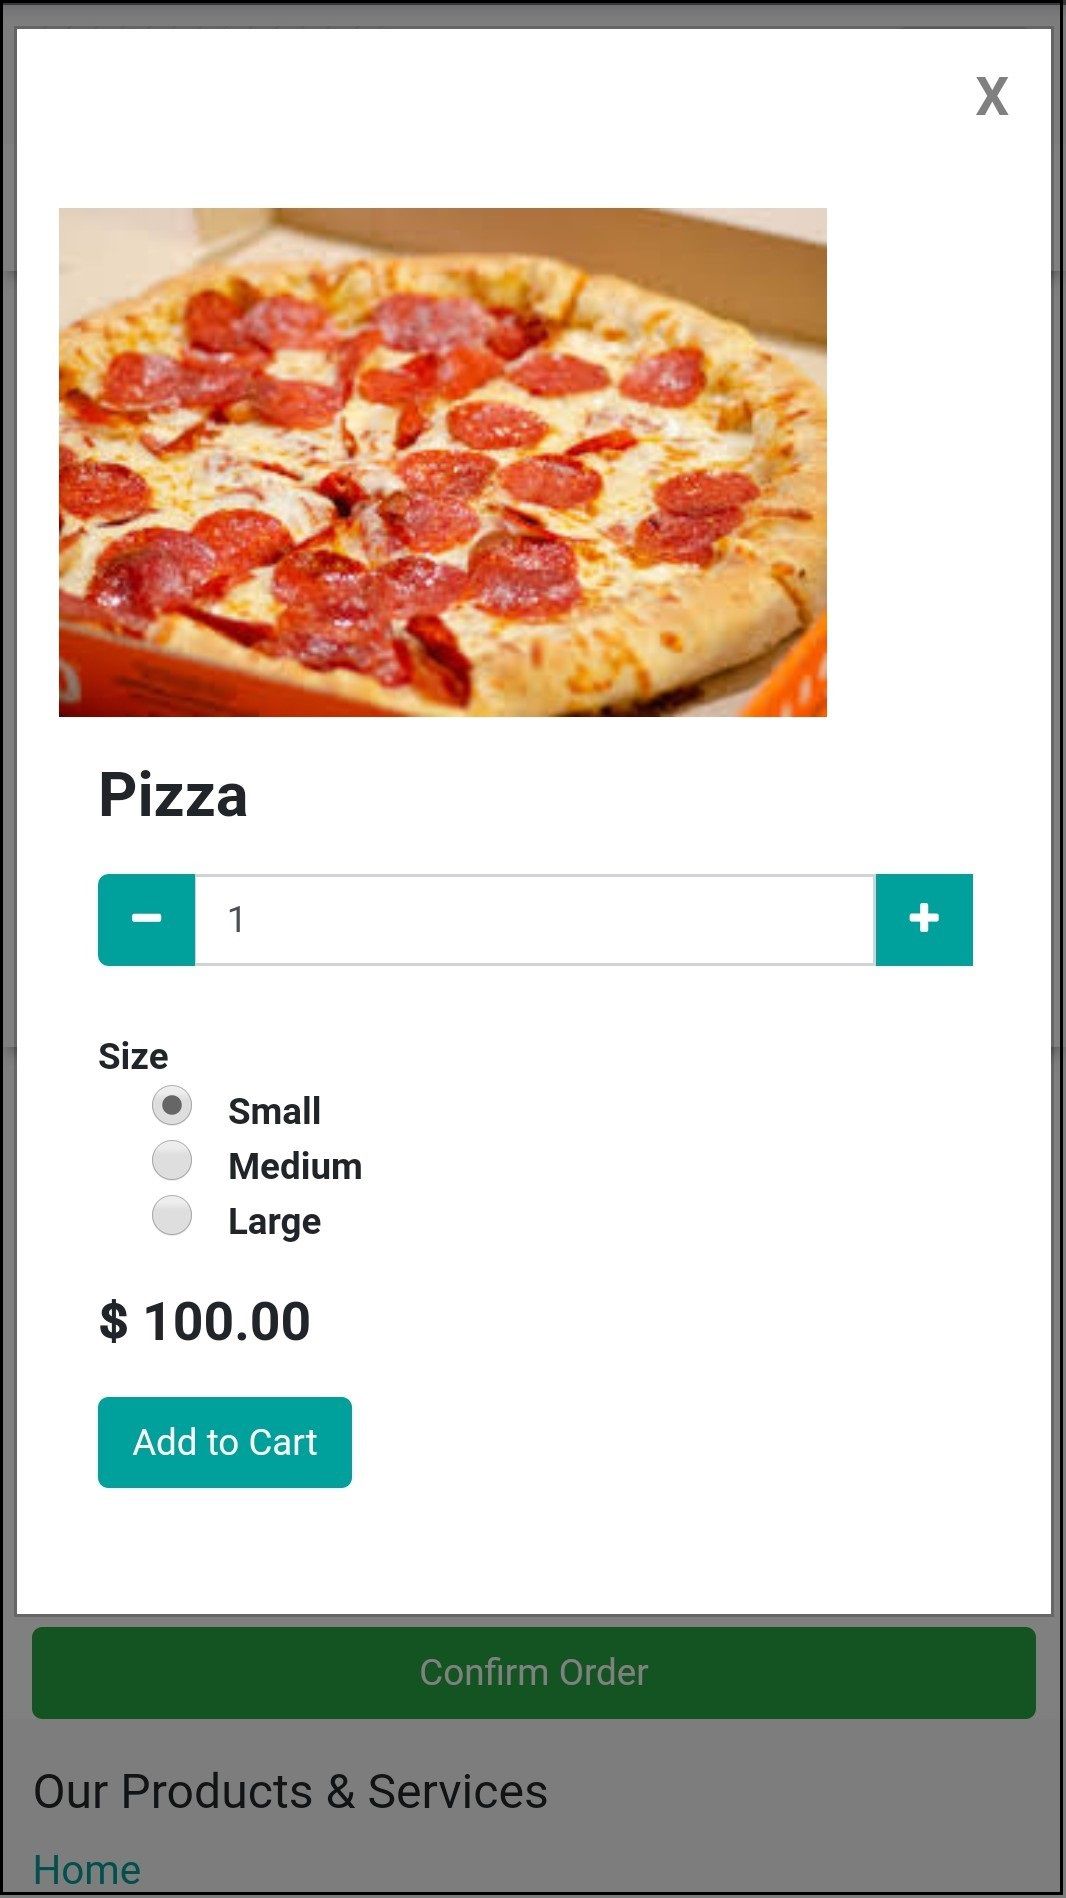 Example: Let us Add Pizza to the Order